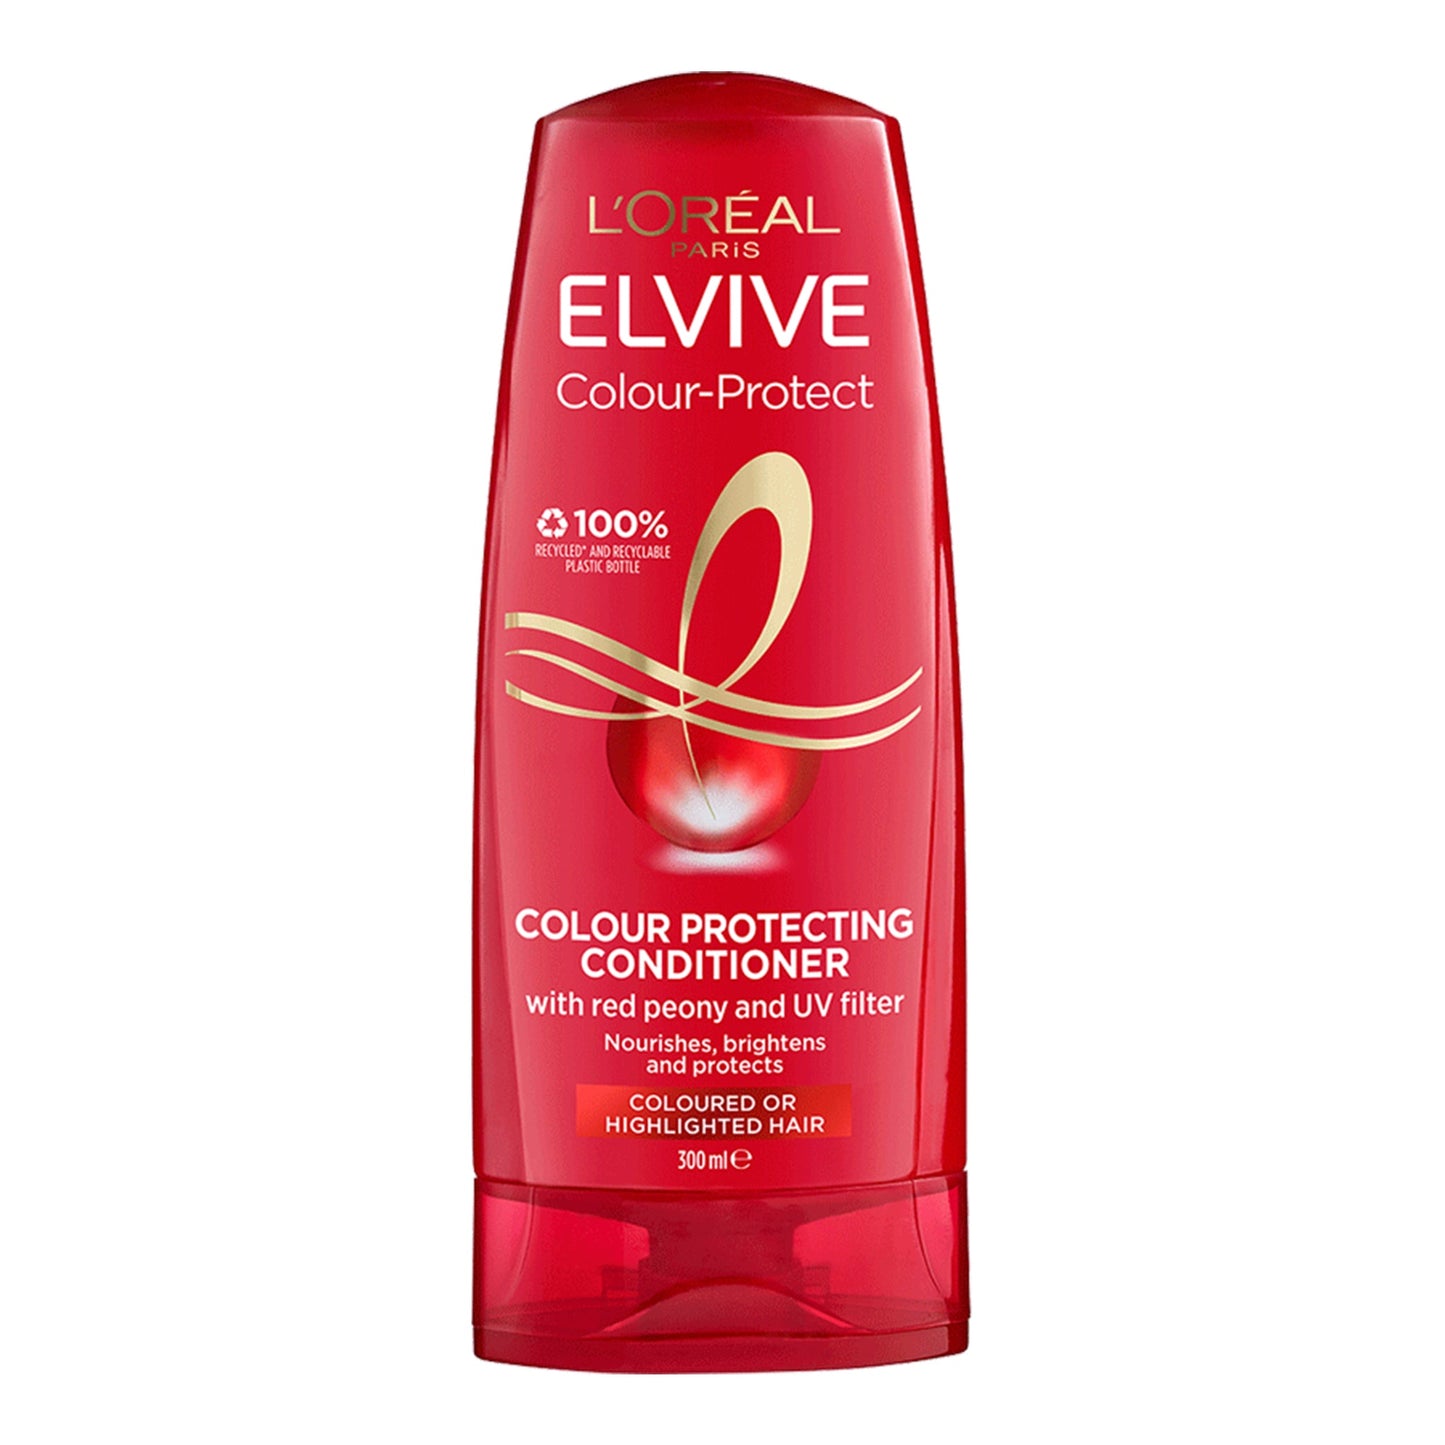 L'OREAL PARIS - ELVIVE COLOUR PROTECT COLOUR PROTECTING CONDITIONER WITH UV FILTER & RED PEONY - 300ML